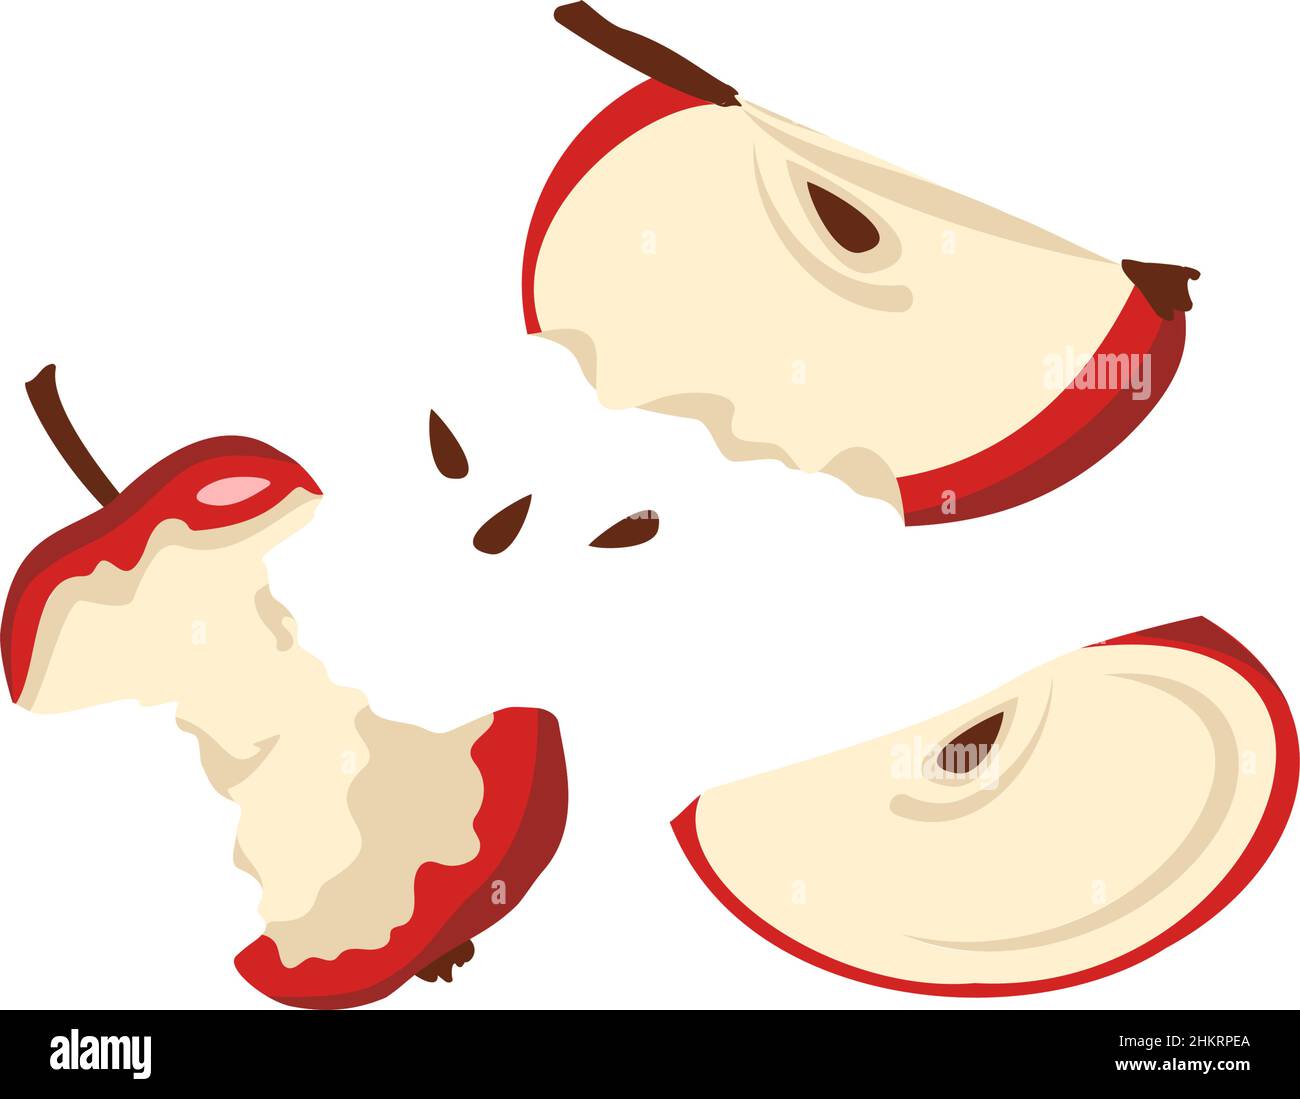 Red apple slices with seeds and stub. Sliced food for healthy diet. Sweet snack. Vector flat illustration Stock Vector